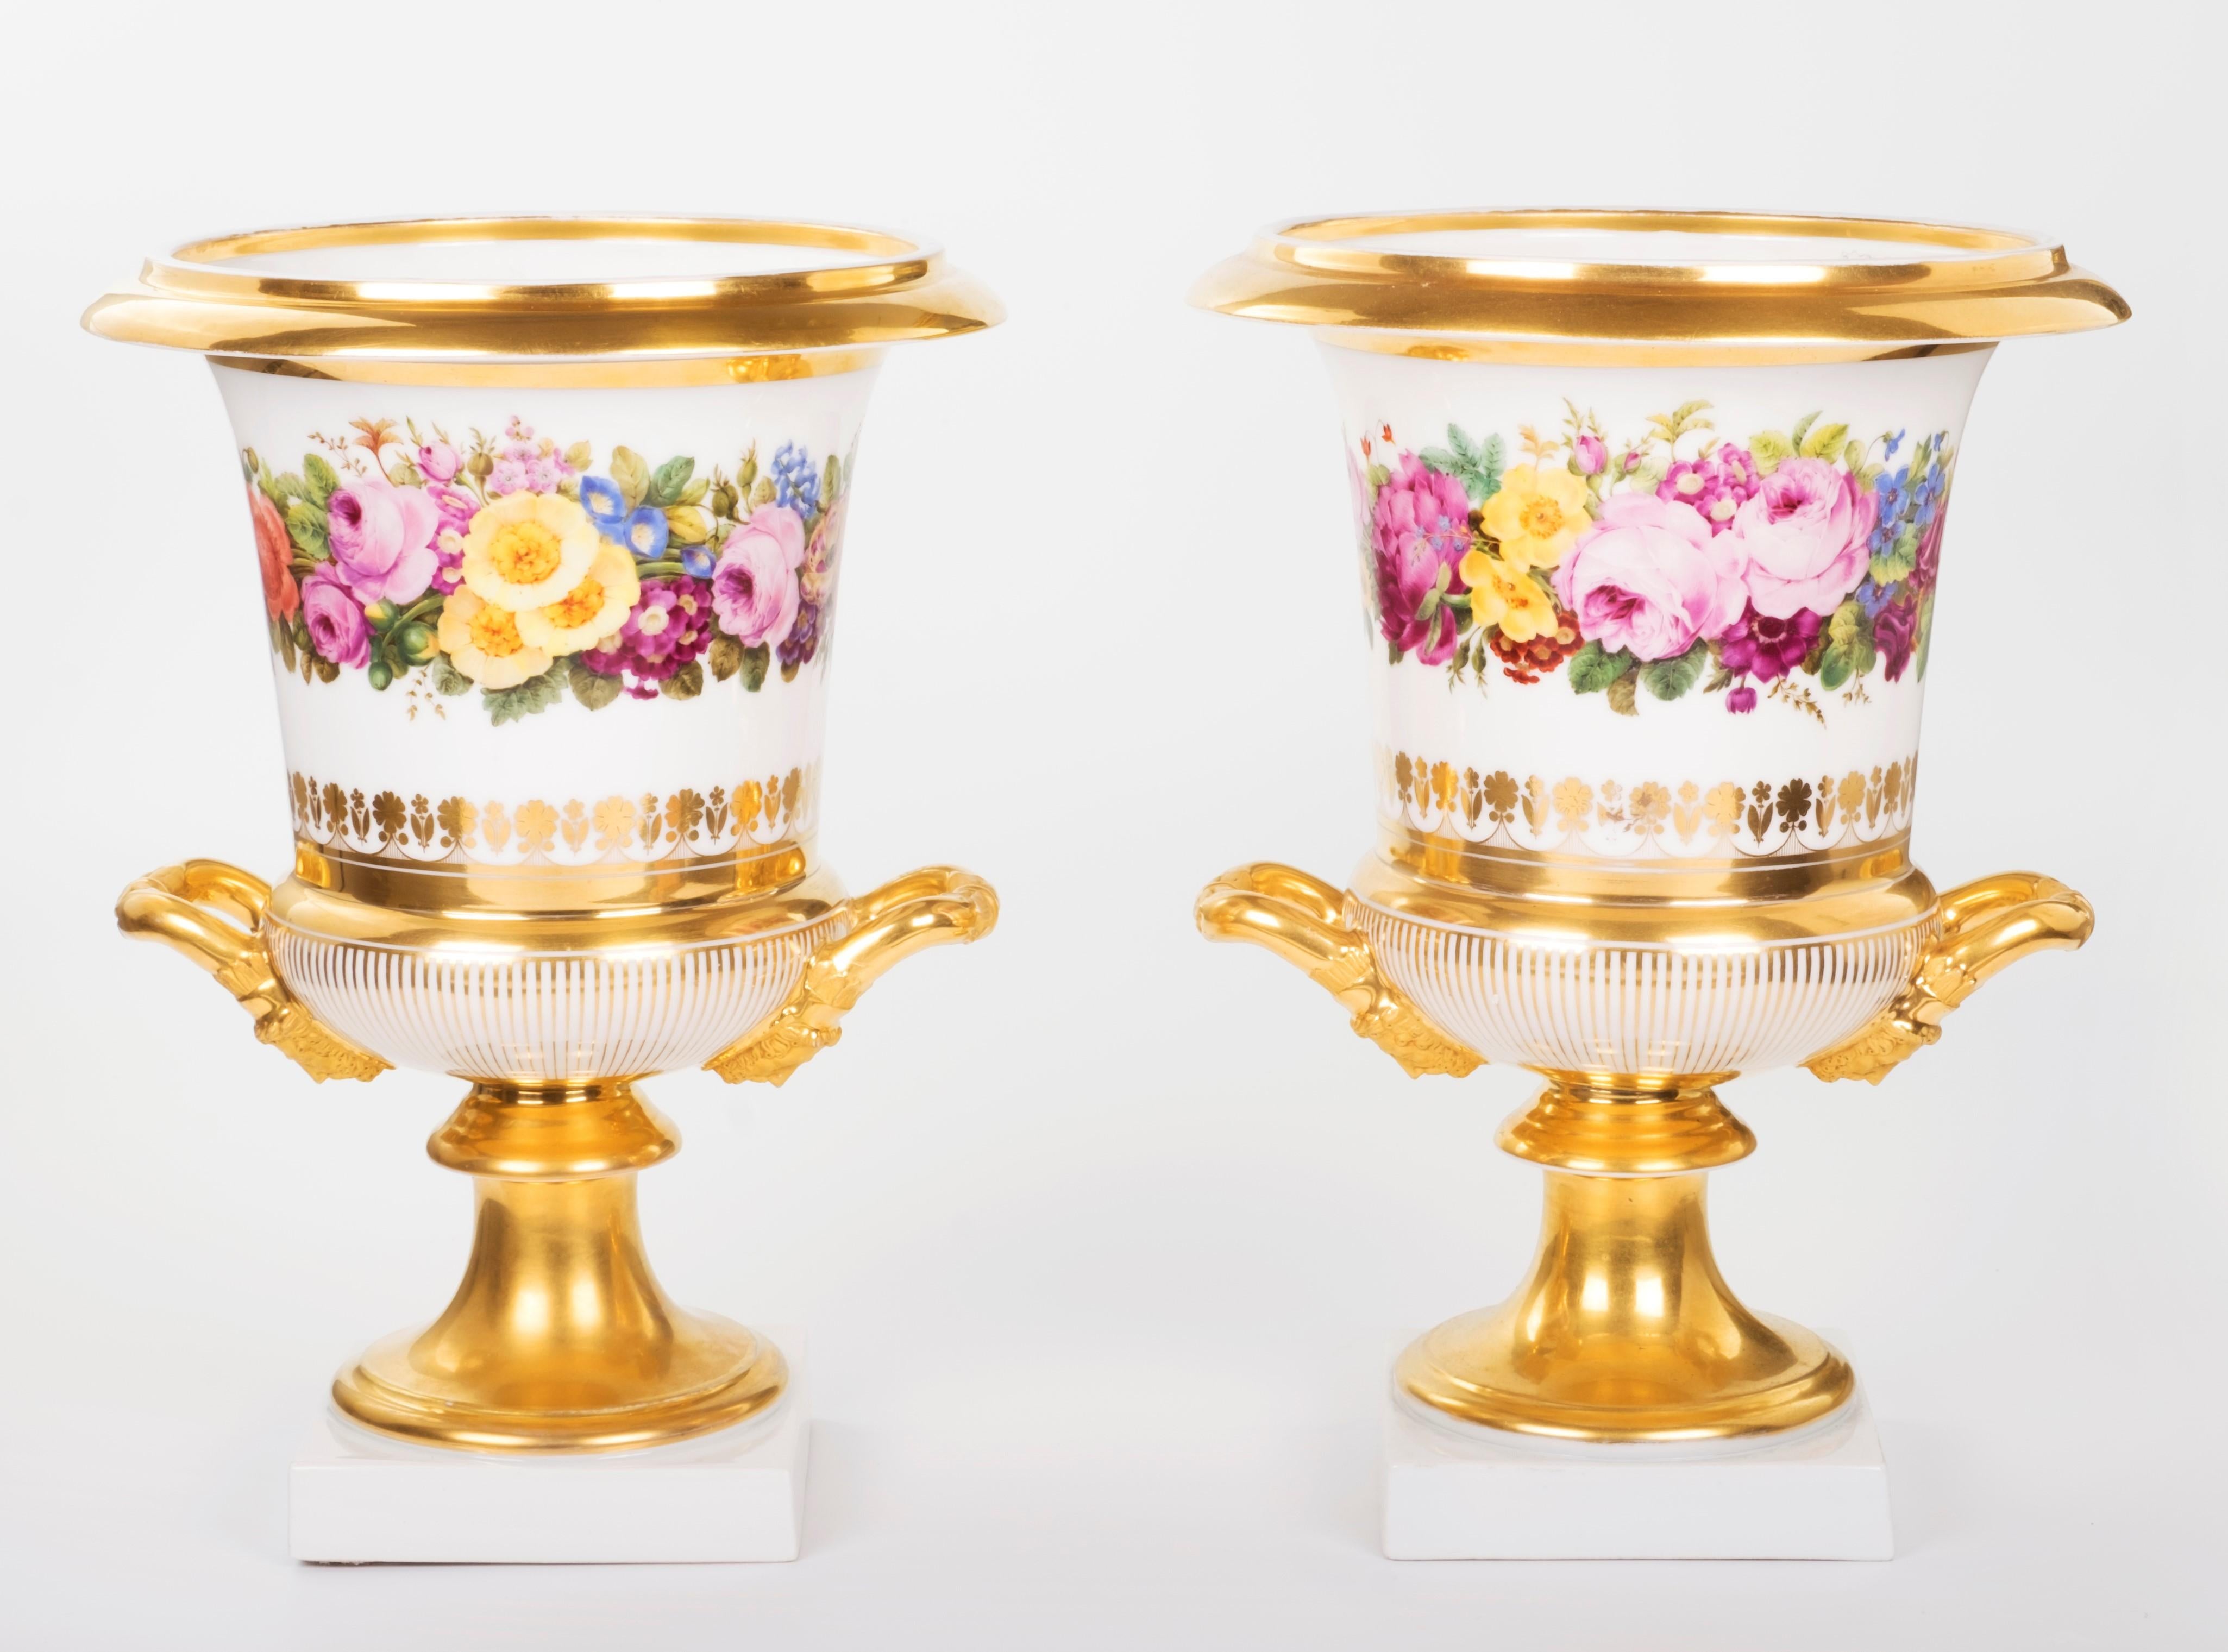 A set of two crater vases from the second quarter of 19th century, century 1825-1830,
made of porcelain of France, crafted in the factory of Mortelèque in Ixelles (near Brussels),
Belgium and painted by the artist Frédéric Faber (1782-1844).
The